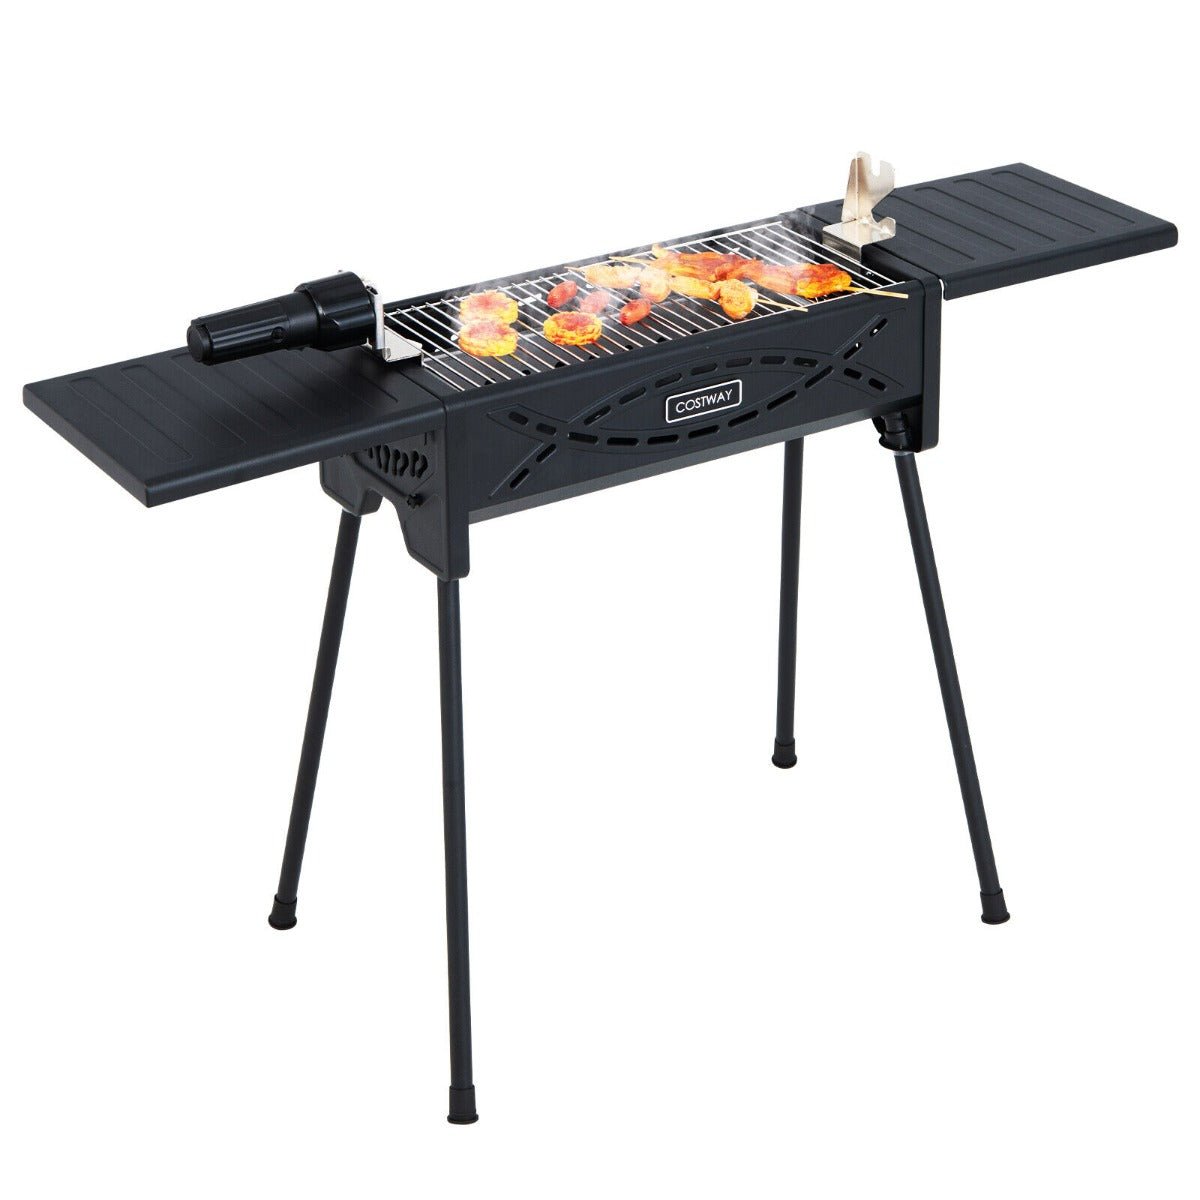 Portable Charcoal Barbecue Grill with Roasting Fork Detachable Legs Black